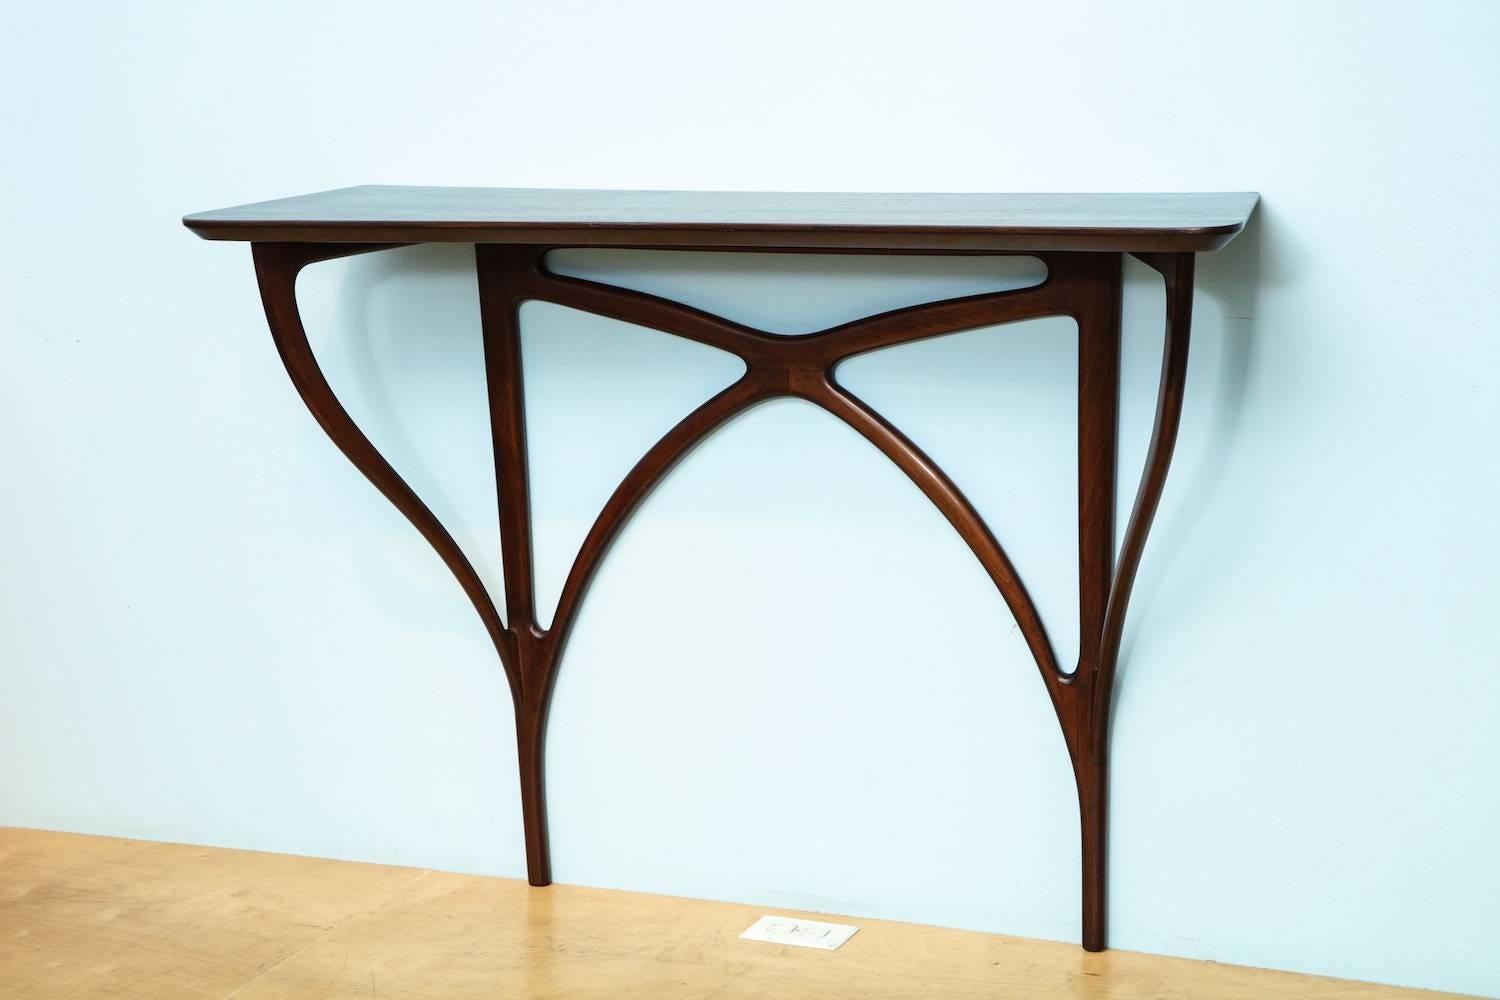 Rare wall-mounted console table by Ico Parisi.
Produced by Arte Casa, Cantú, this fantastic model is made of mahogany and has a curvy top with a bevel underneath. Undulating supports that convey a modernist Art Nouveau spirit and overall sensual